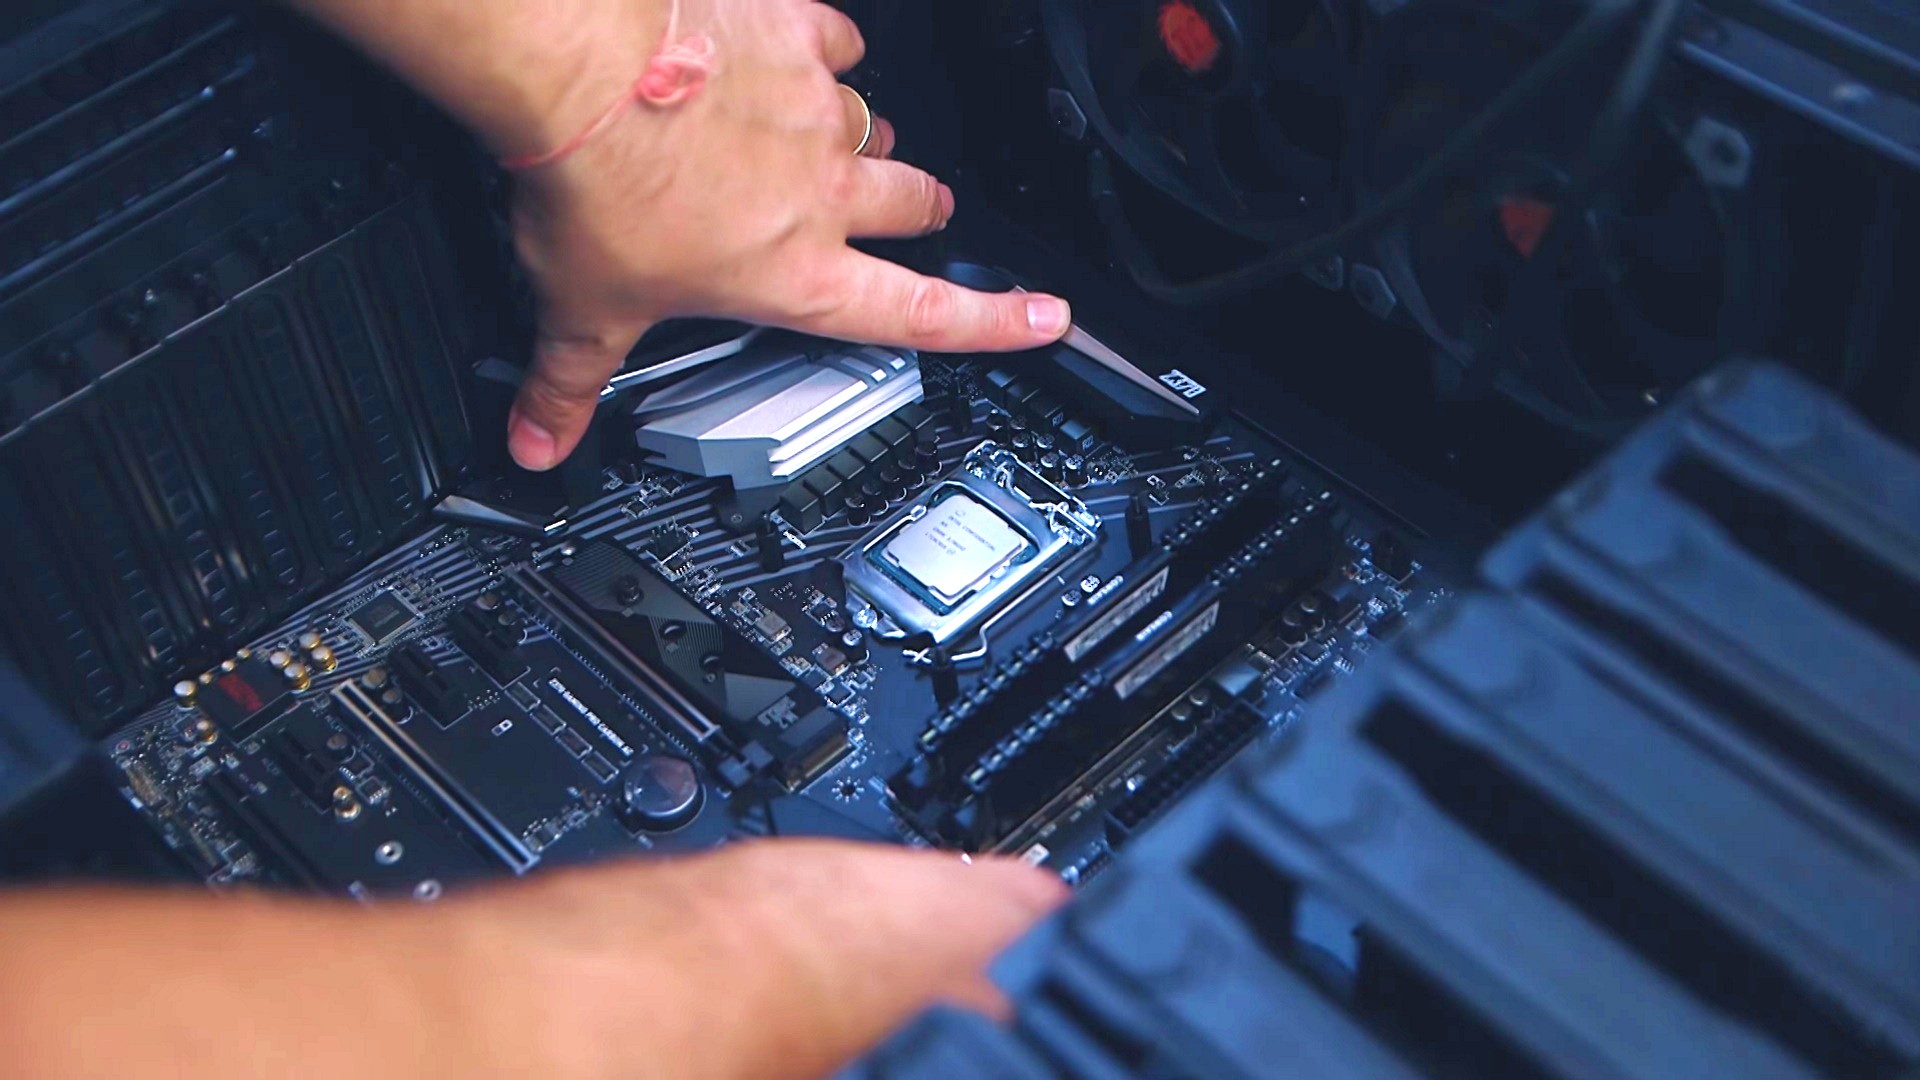 How to build a gaming PC in 2022